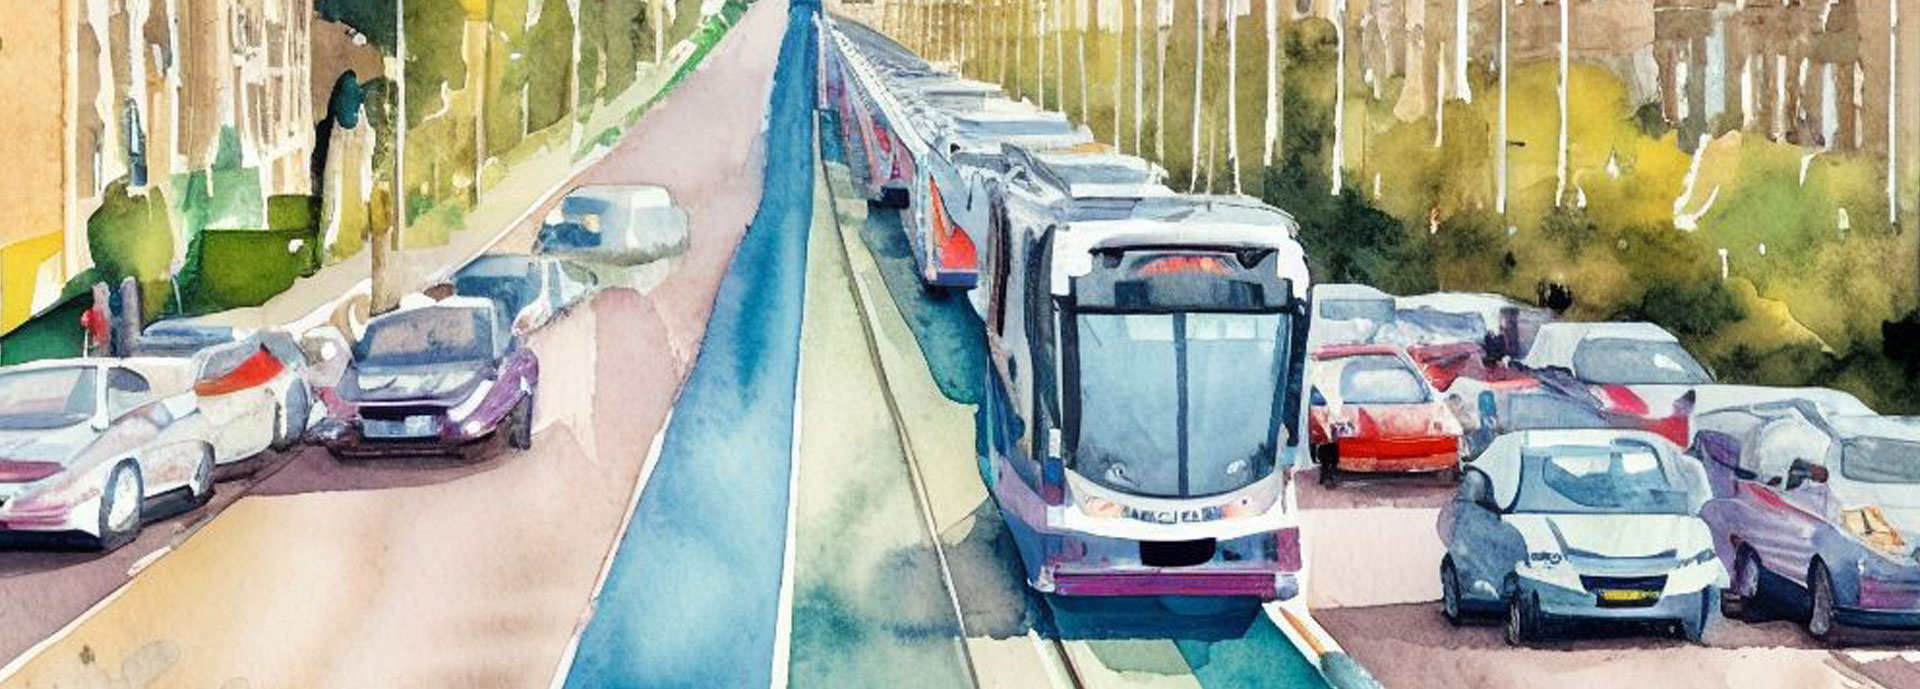 Bus and cars along a road painted in watercolour